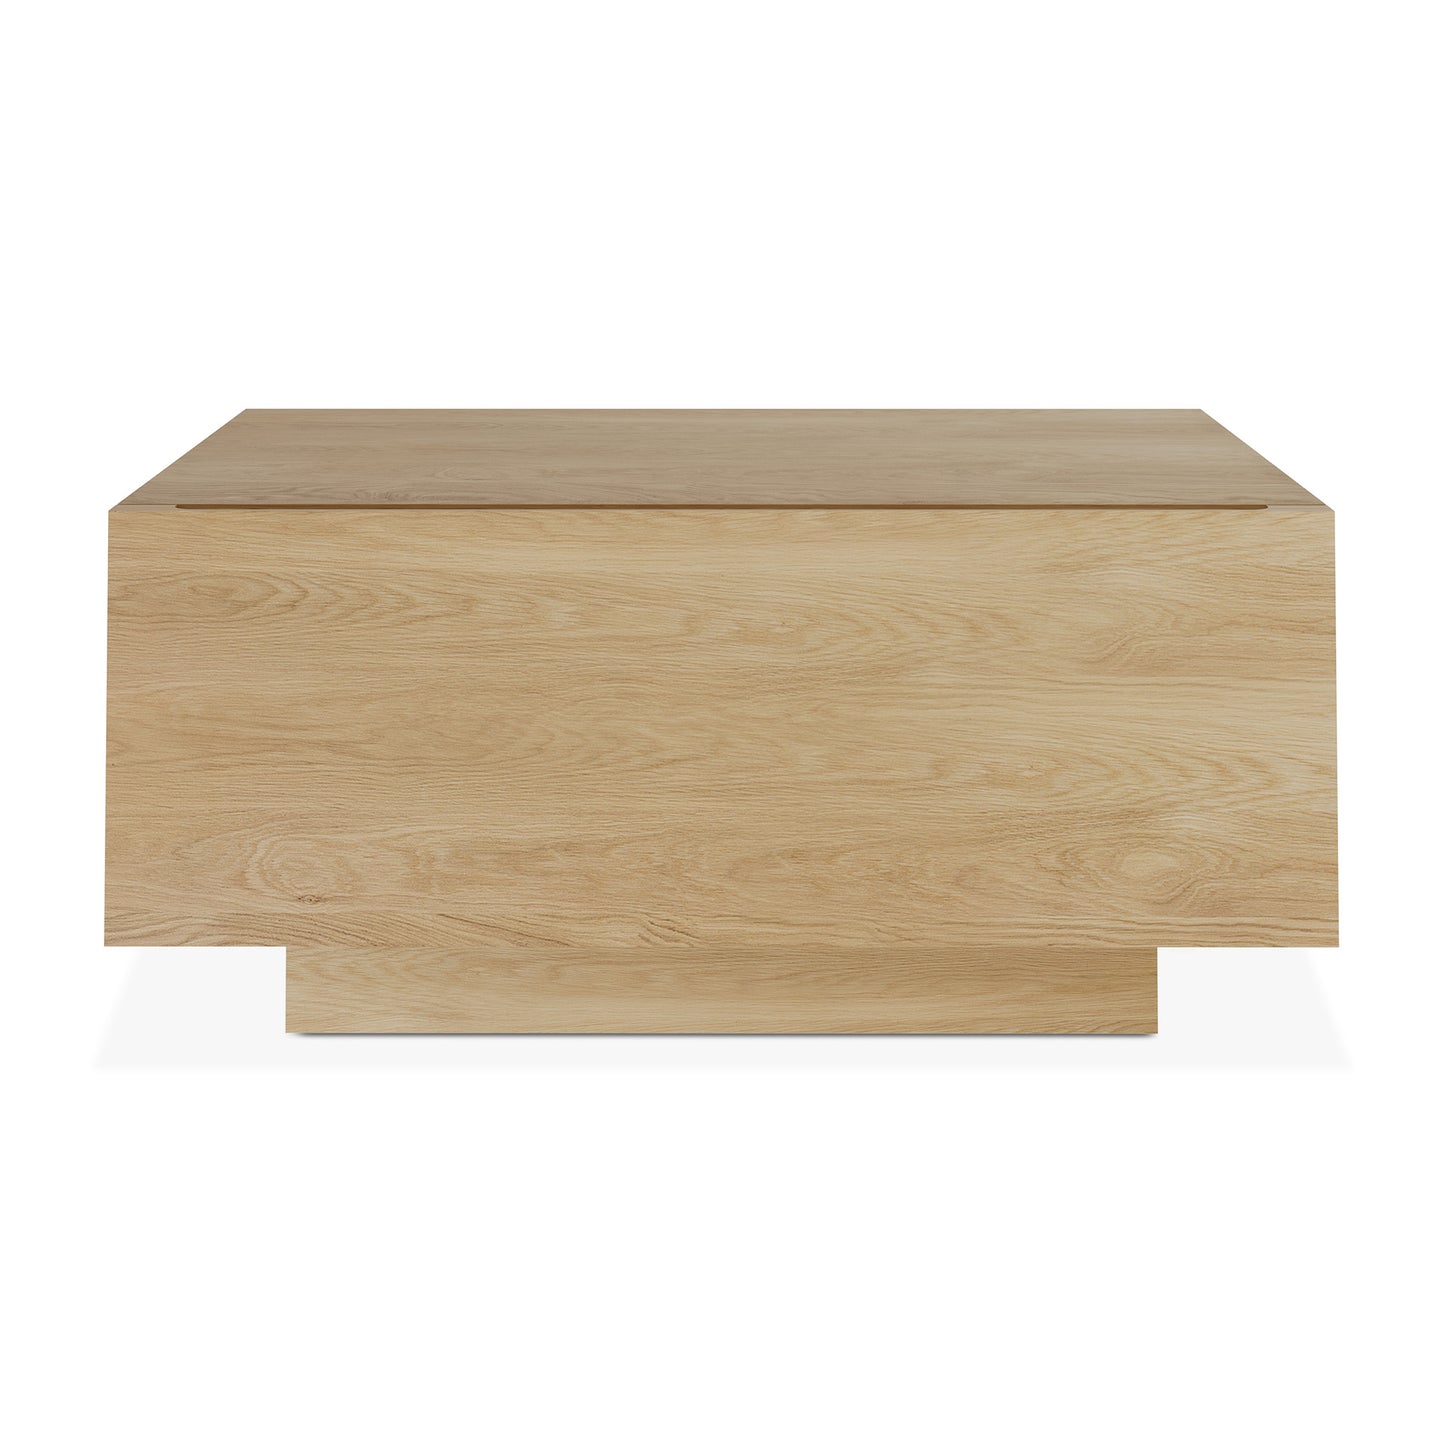 Ethnicraft Oak Madra Bedside Table is available from Make Your House A Home, Bendigo, Victoria, Australia